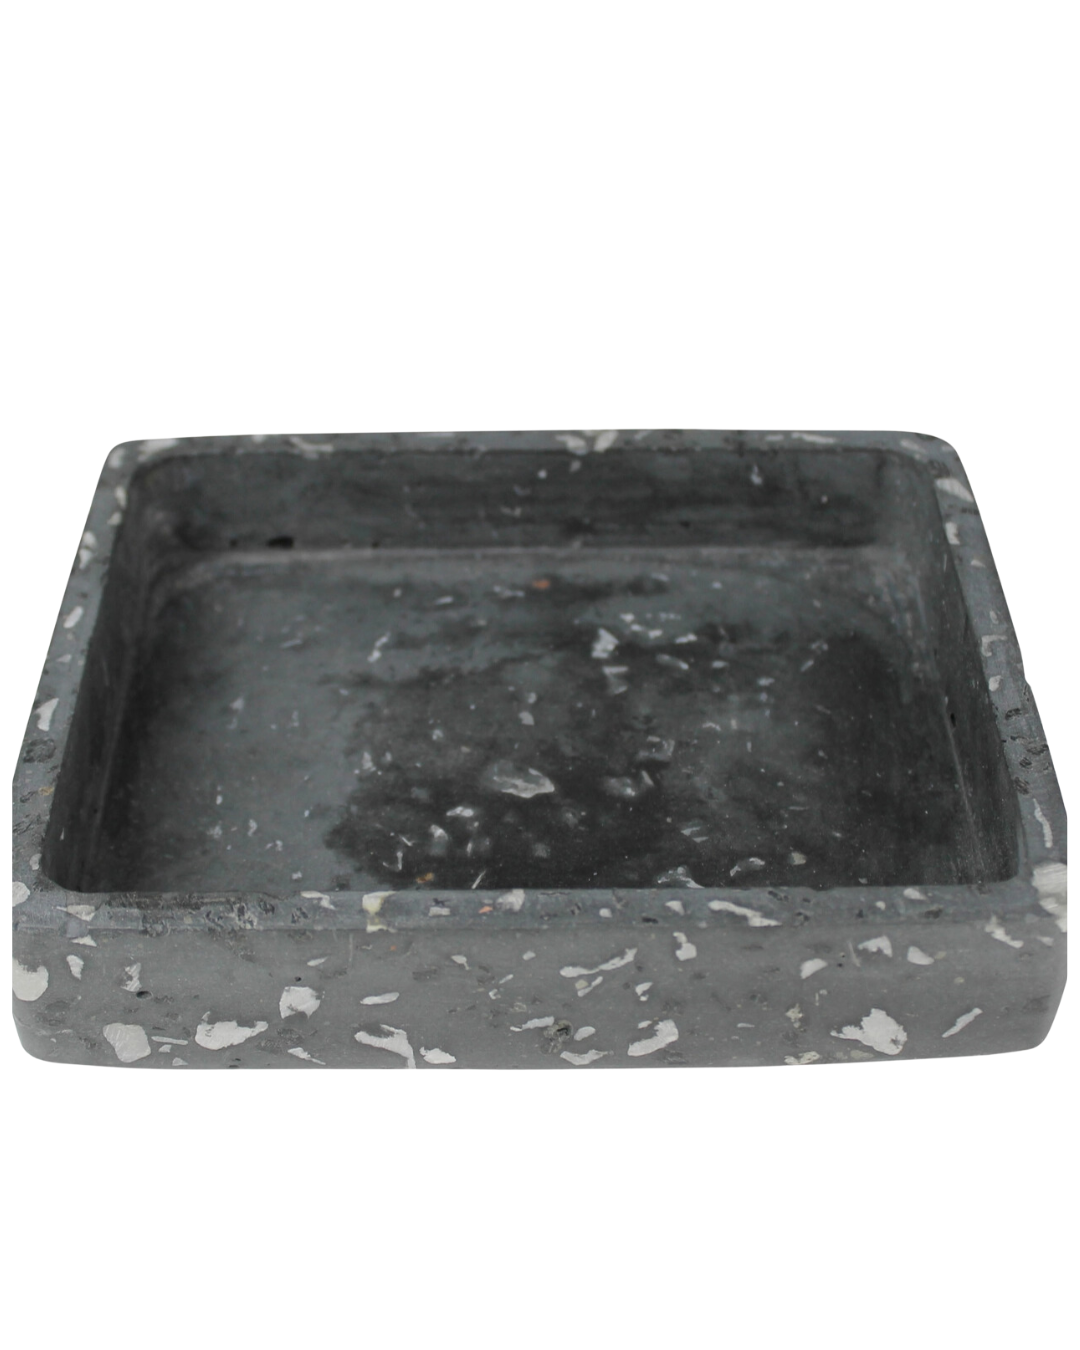 A rectangular terrazzo tray black with a flat bottom and raised edges, showing signs of wear in a Scottsdale Arizona bungalow, and several white speckles scattered across its surface.